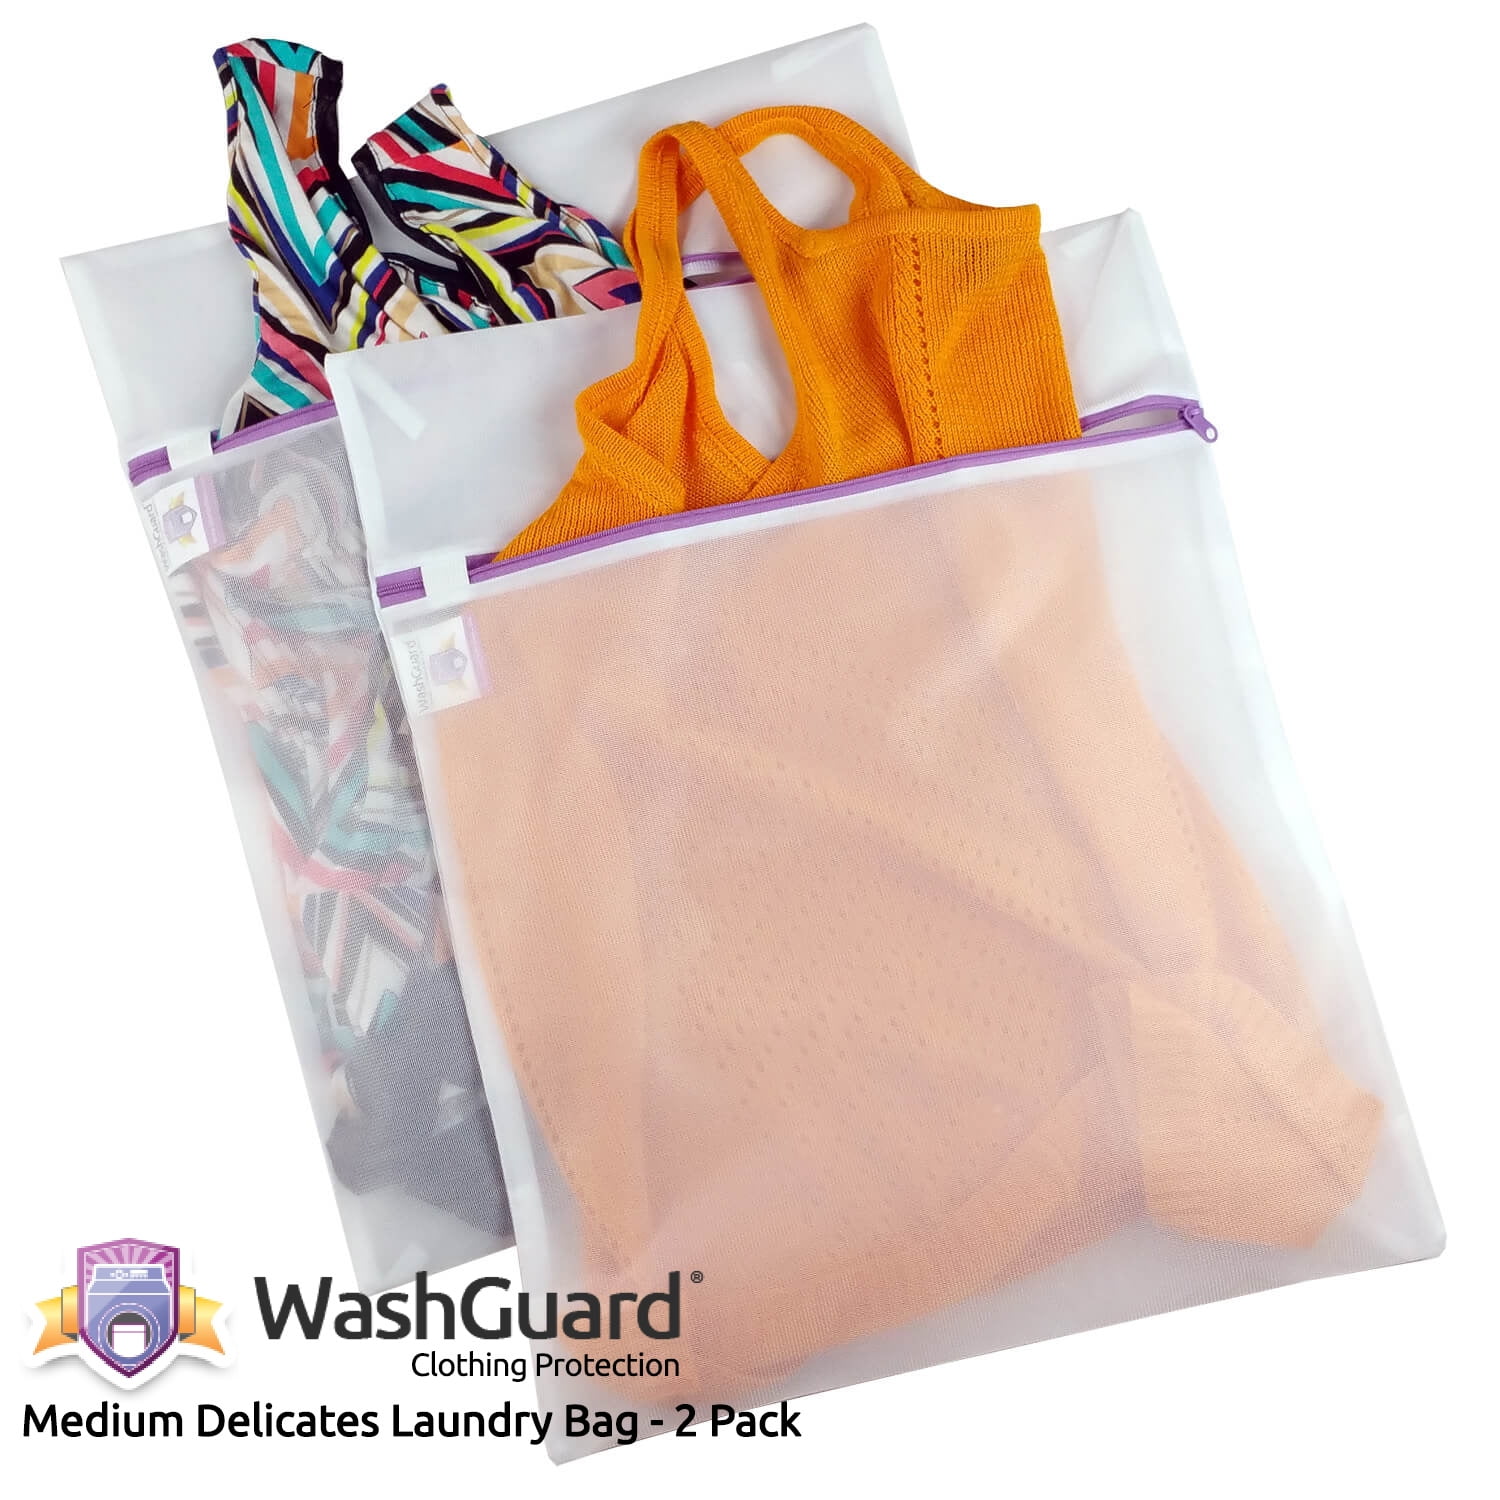 New and Improved Durability Pack of 5 1 Year Replacement Guarantee 5 Mesh Wash Bags with Secured Zipper Closure,